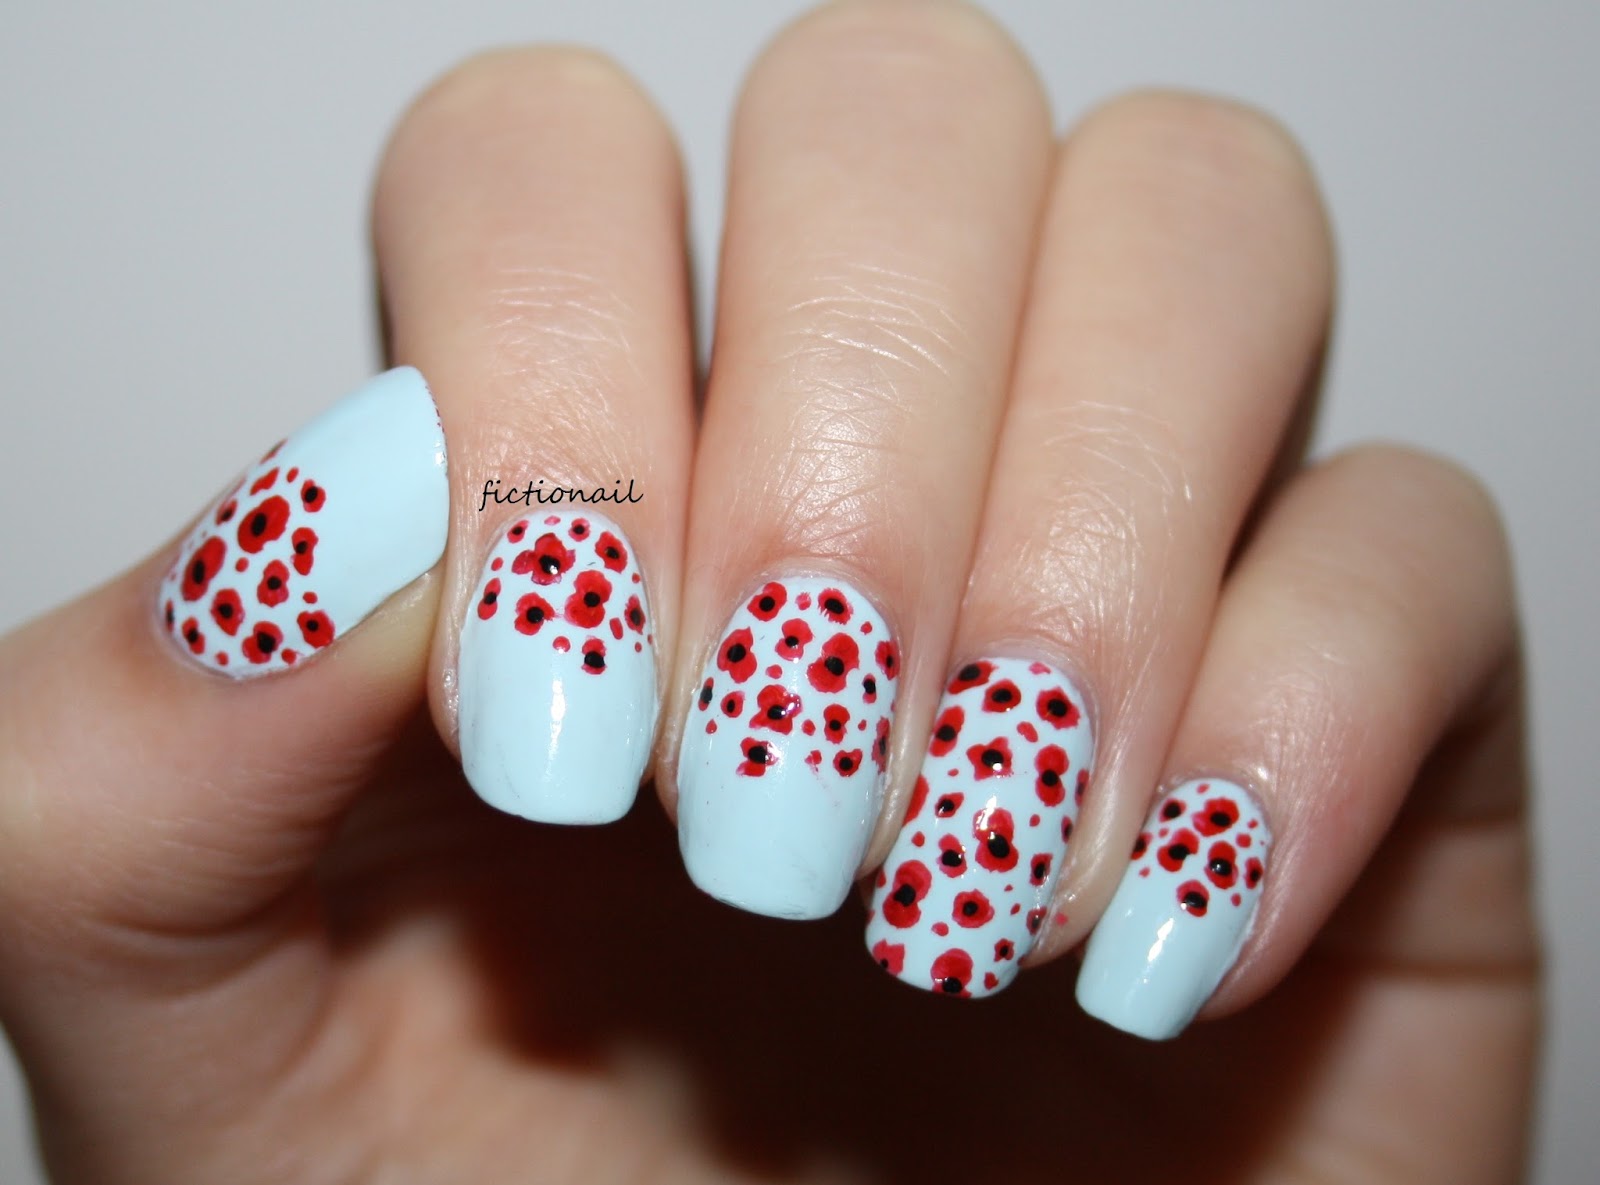 7. Poppy Nail Designs for Veterans Day - wide 5